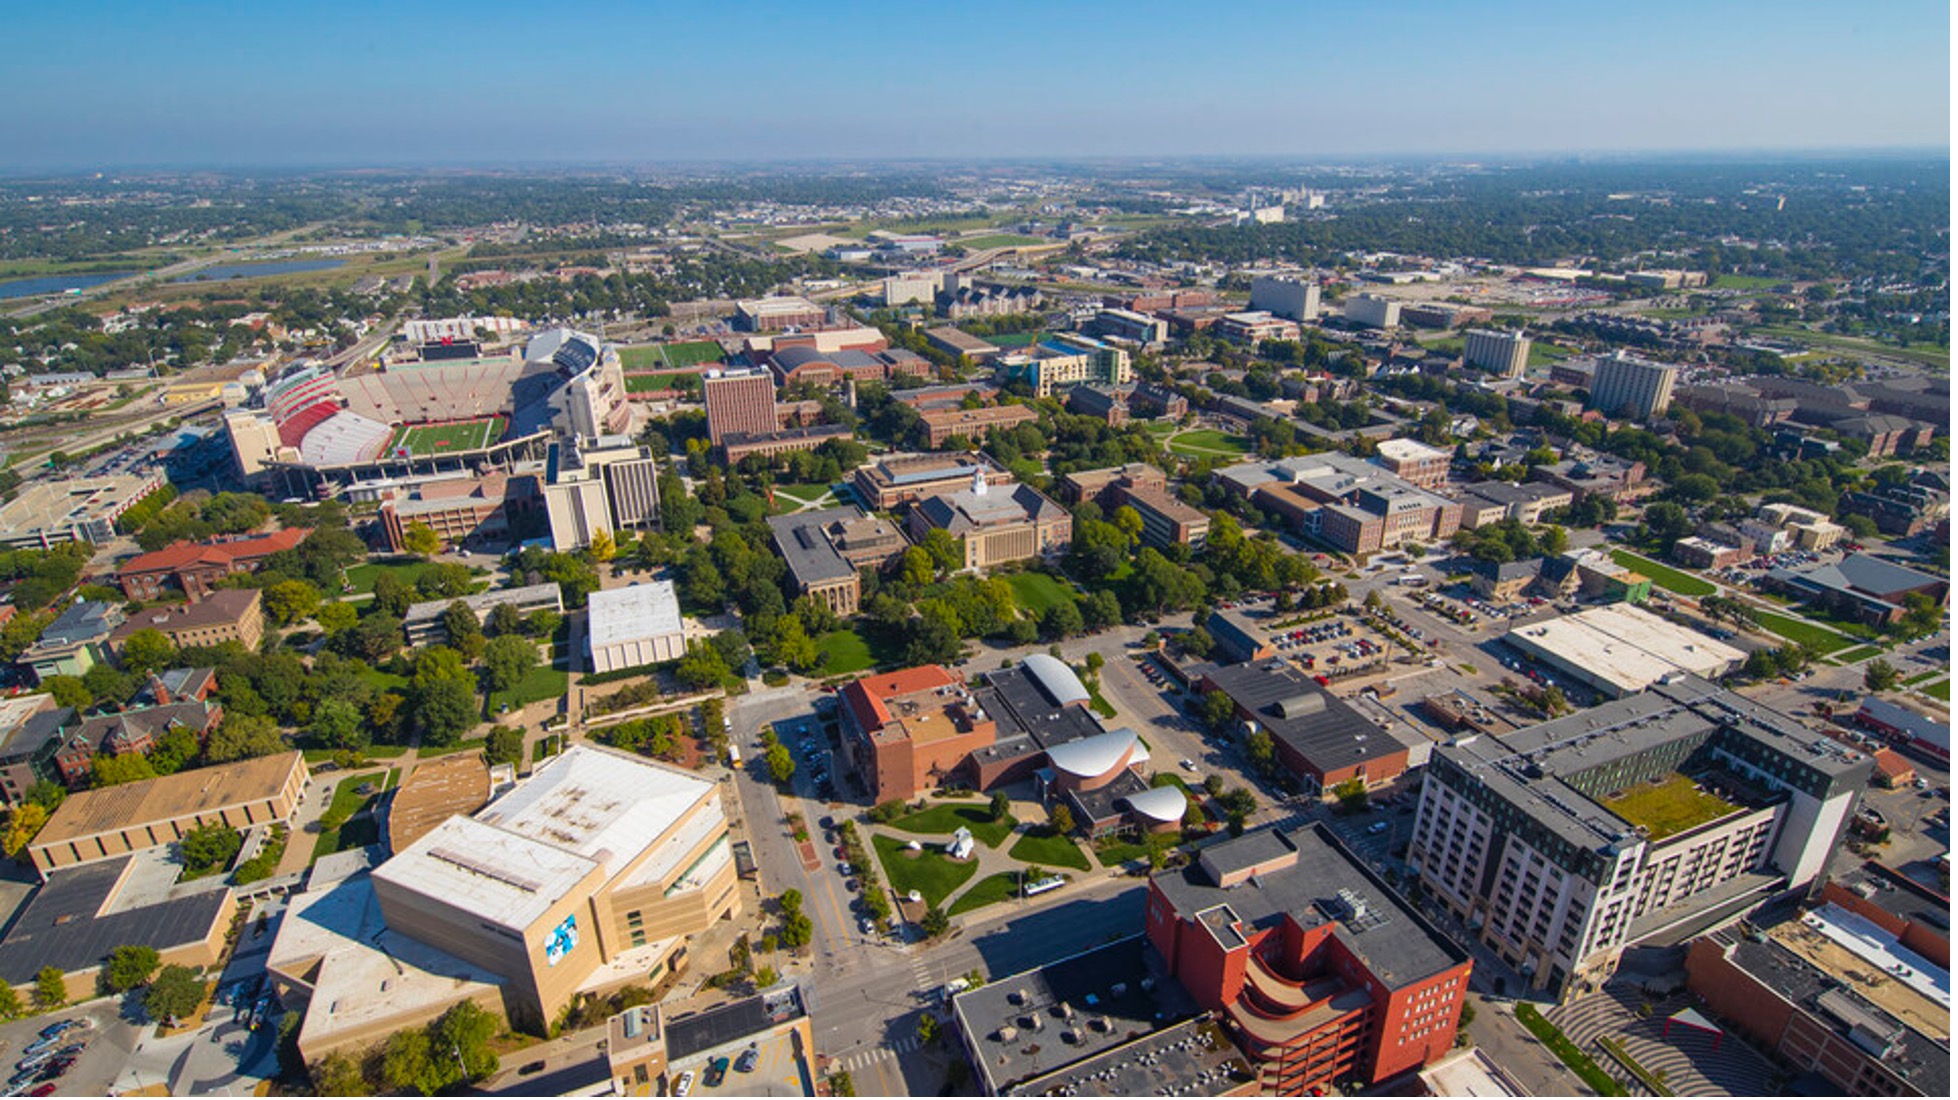 Aerial view of city campus.